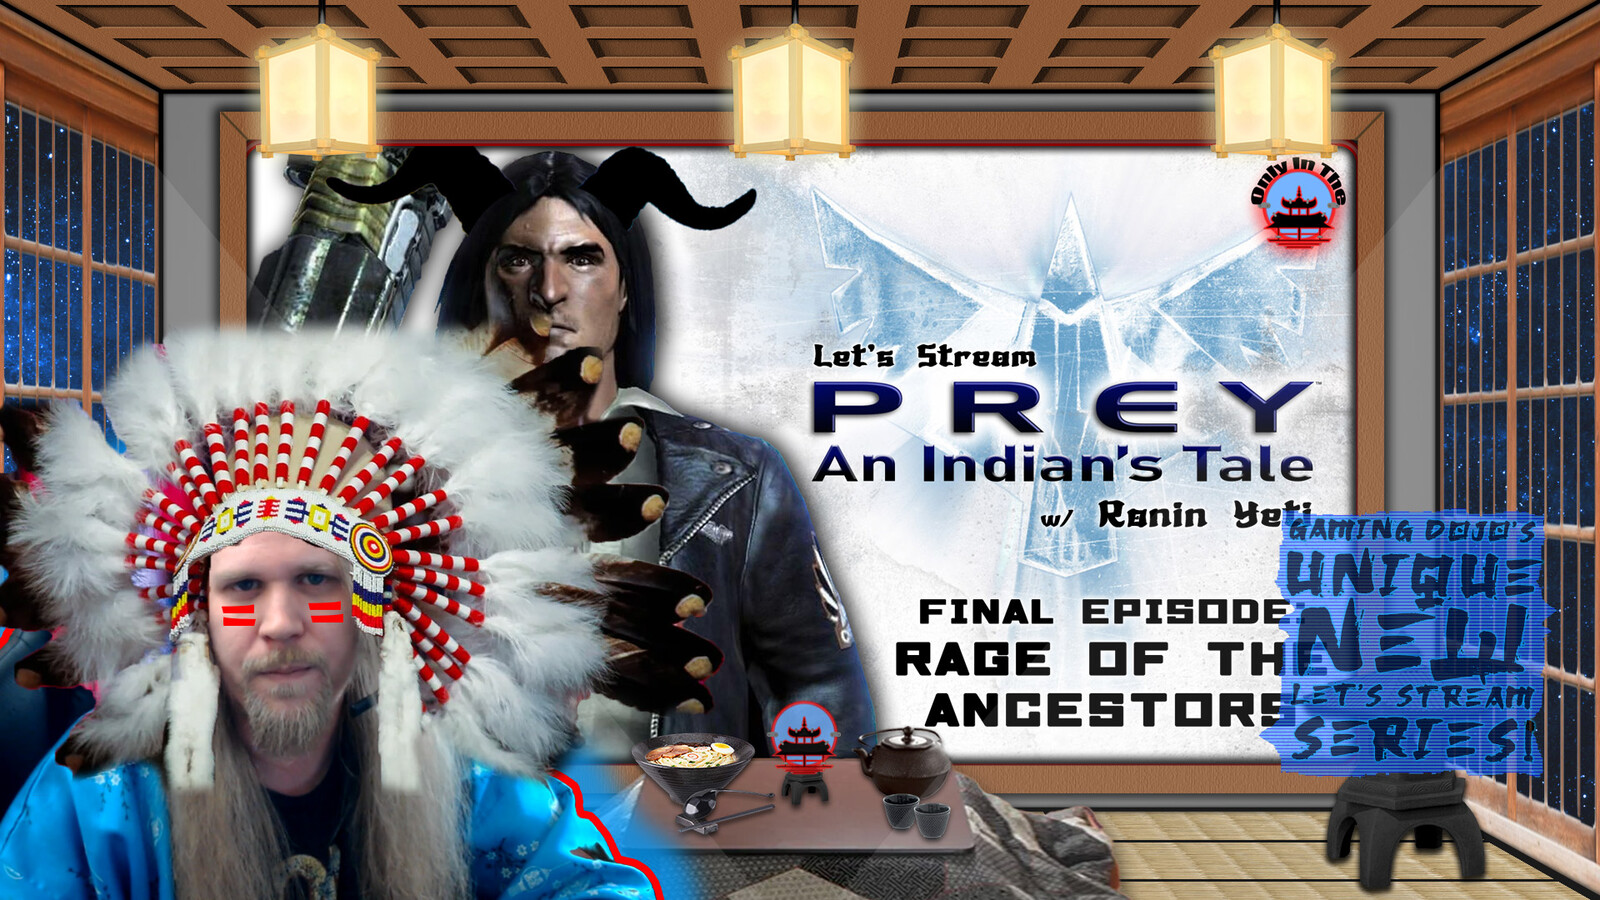 Let's Stream "Prey: An Indian's Tale" Final Episode Image | Ronin Yeti Twitch Streaming